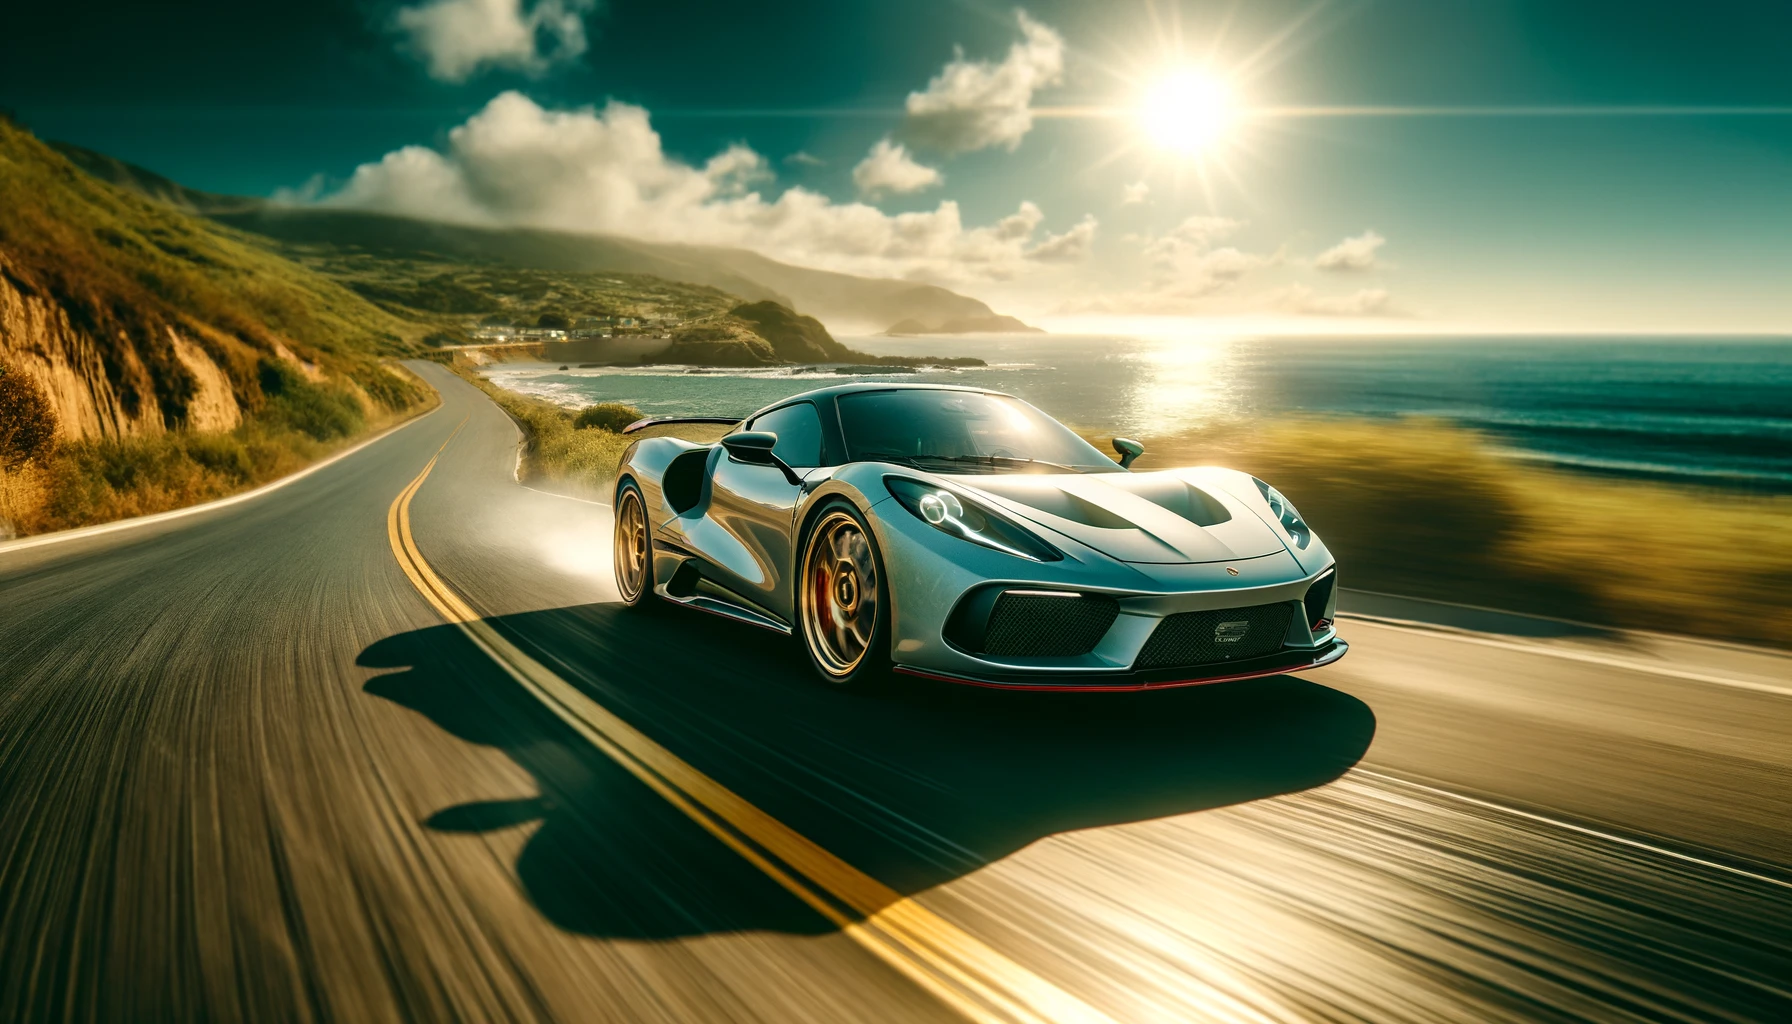 A vibrant and dynamic image showcasing Pirelli summer tires. The scene captures a high-performance sports car equipped with Pirelli summer tires, speeding along a coastal road with the ocean in the background. The car is elegantly designed, emphasizing the sleek, low-profile tires which enhance the vehicle's performance and aesthetics. The sunny and clear weather accentuates the summer setting, highlighting the optimal conditions for these tires. The road is slightly wet, showing the tires' excellent traction and handling capabilities. The image is in a 16:9 aspect ratio.